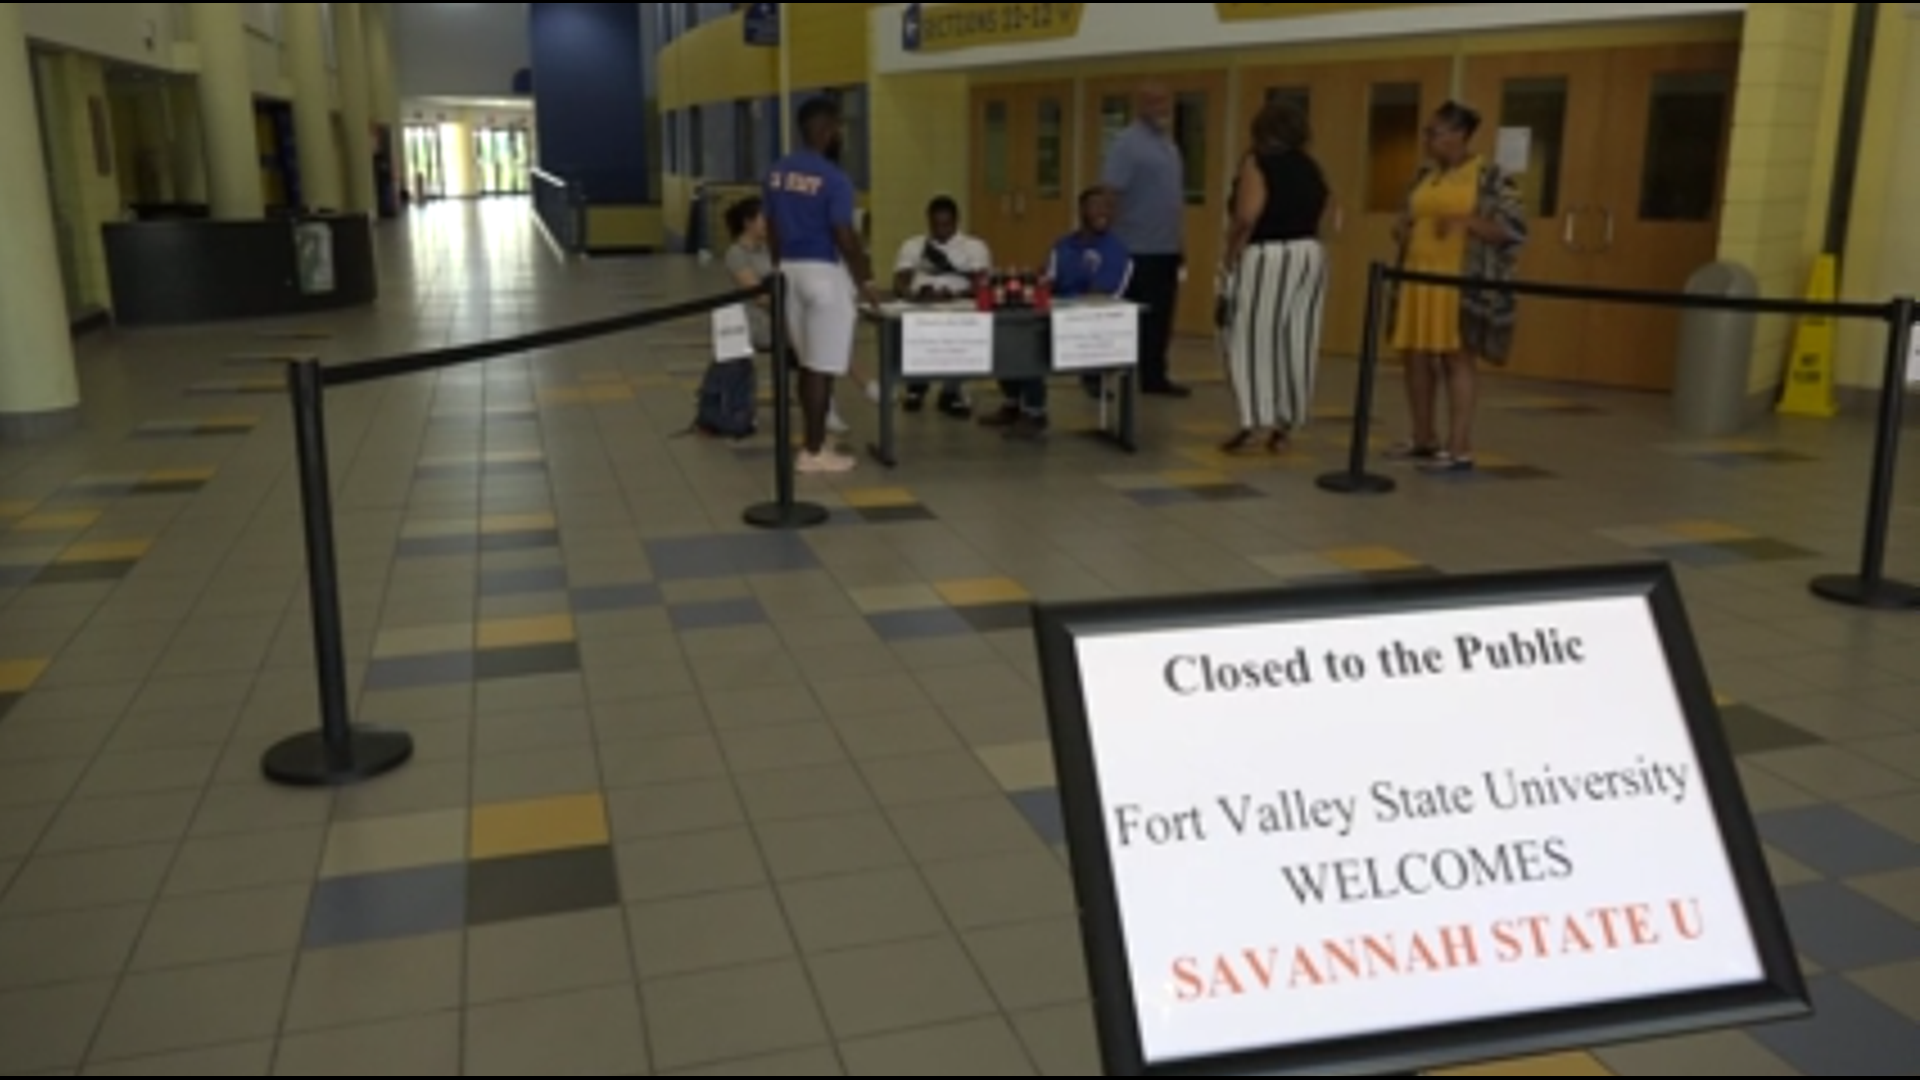 One of the Georgia coastal cities evacuated this week was Savannah, leaving some Savannah State University students to leave the city.